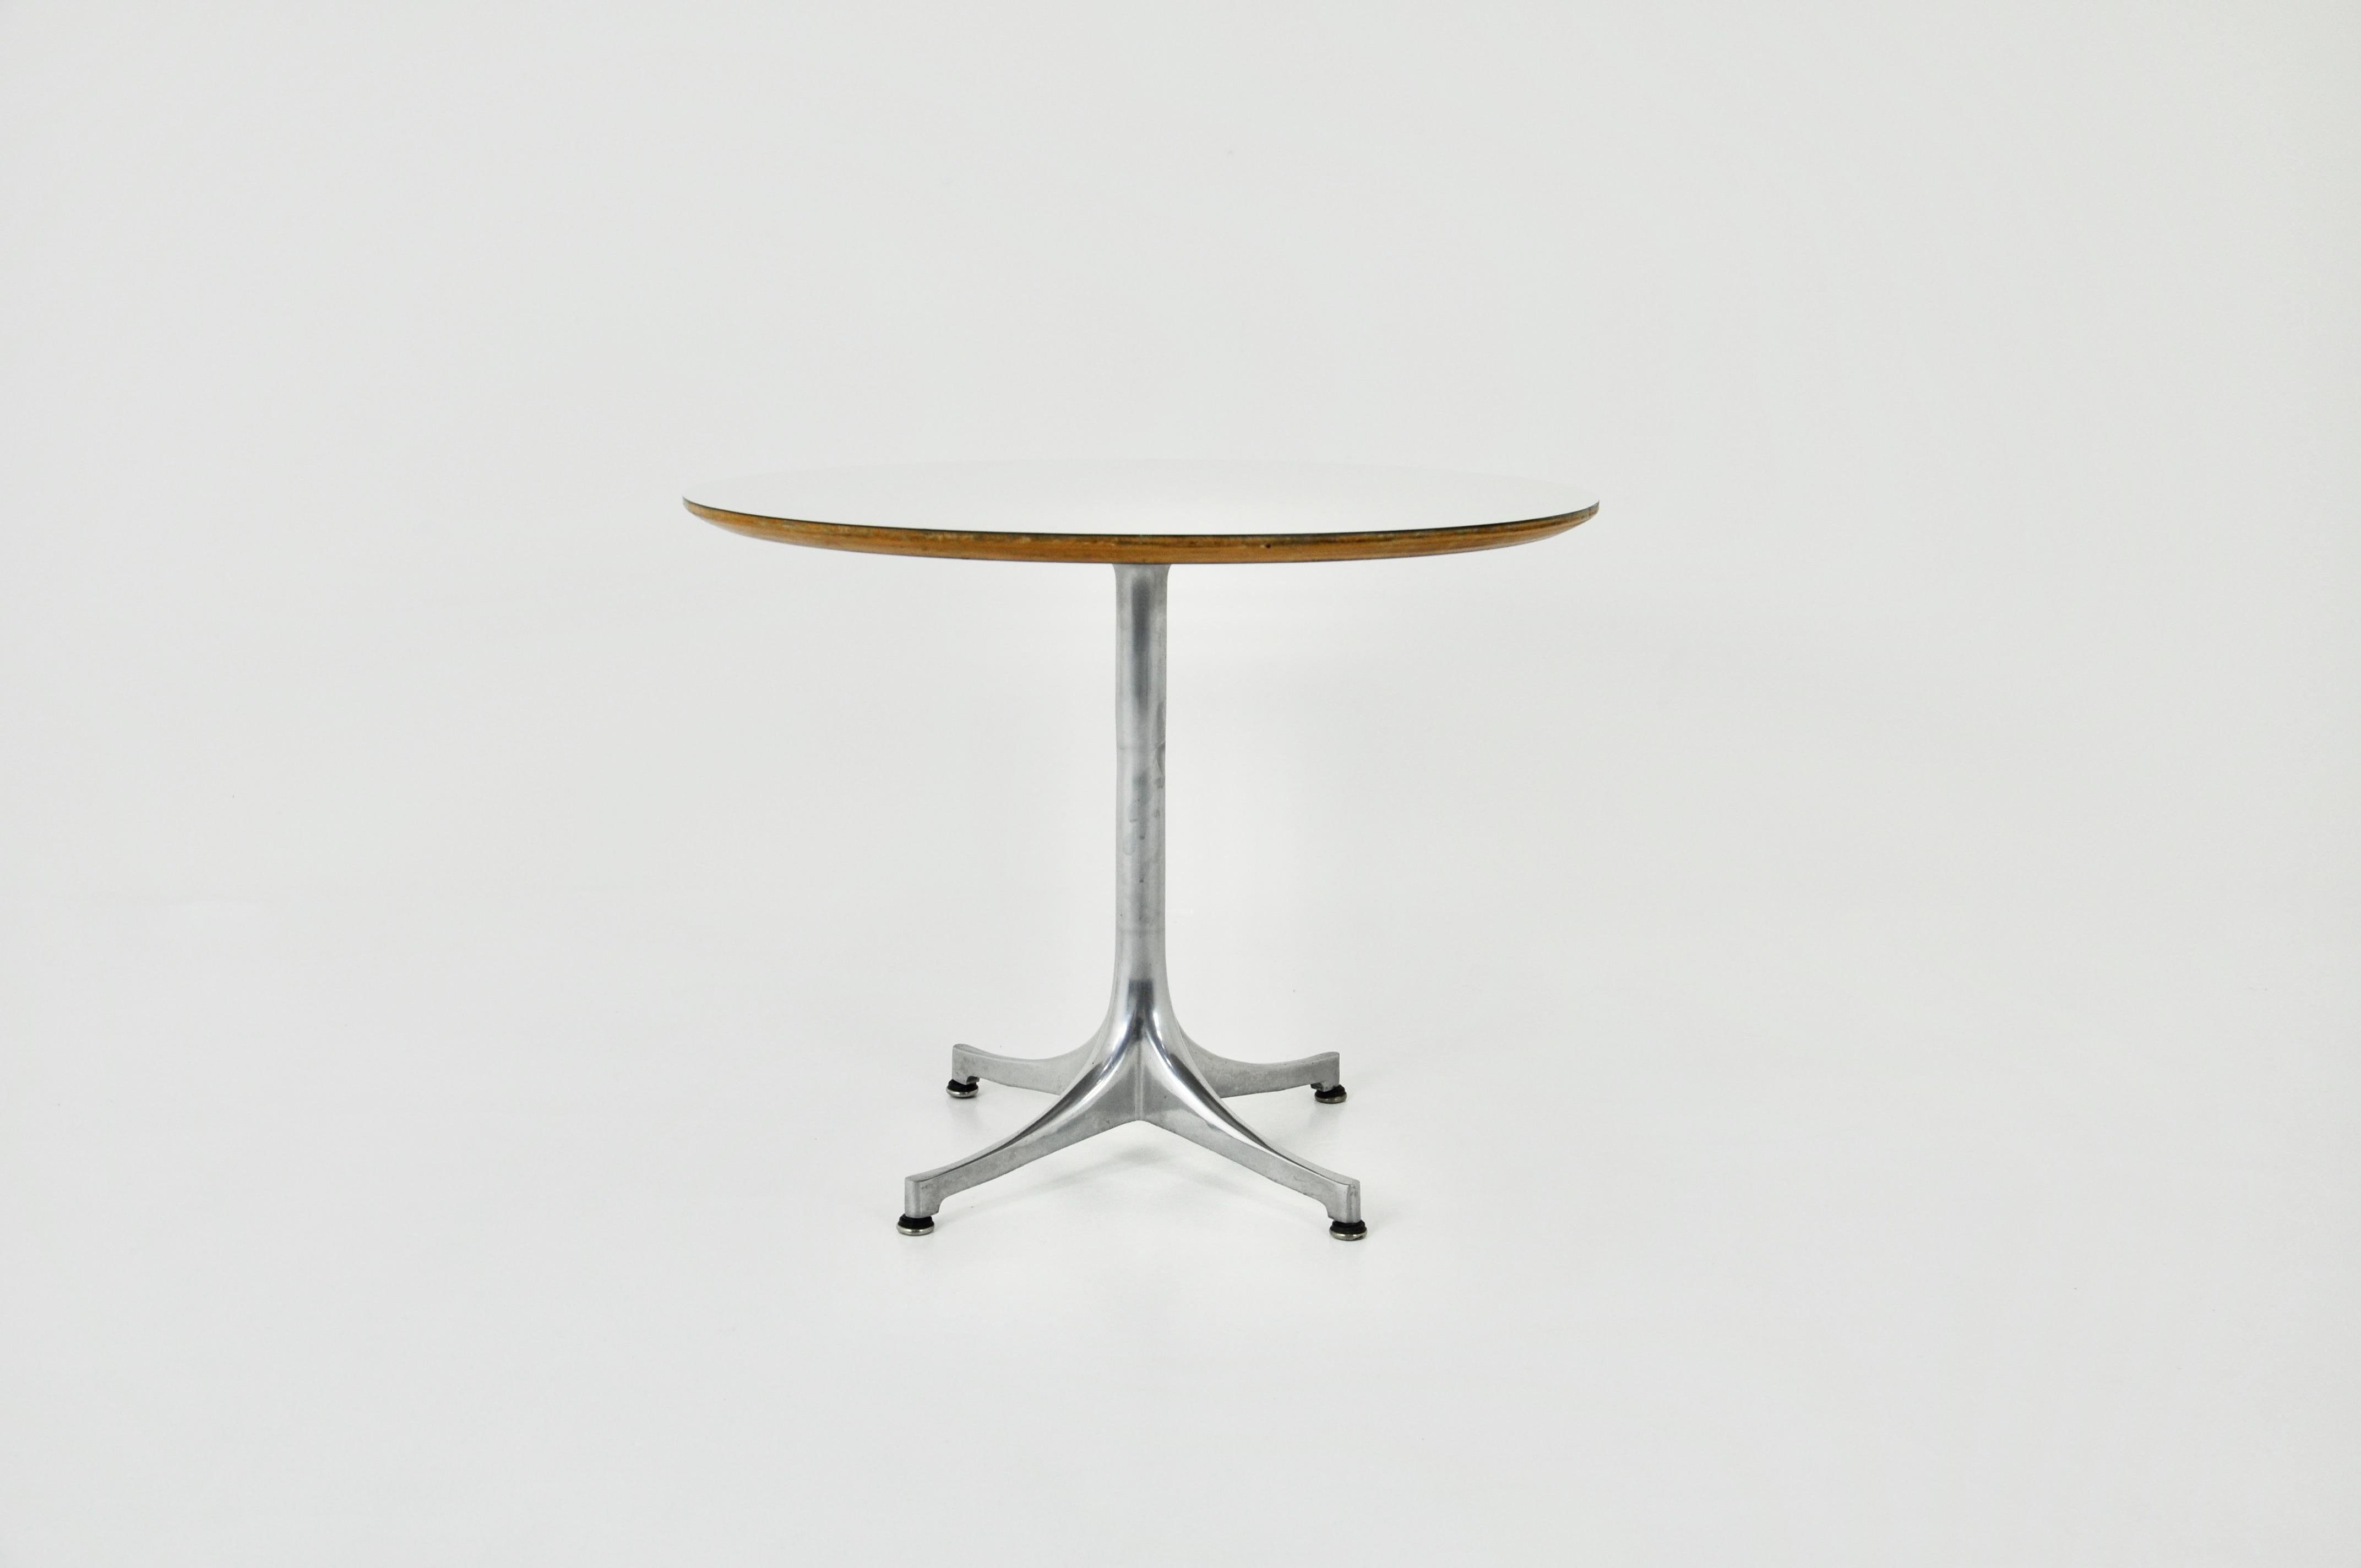 Table with white wooden top and metal base designed by George Nelson and produced by Herman Miller in the 1960s. Wear due to time and age of the table.